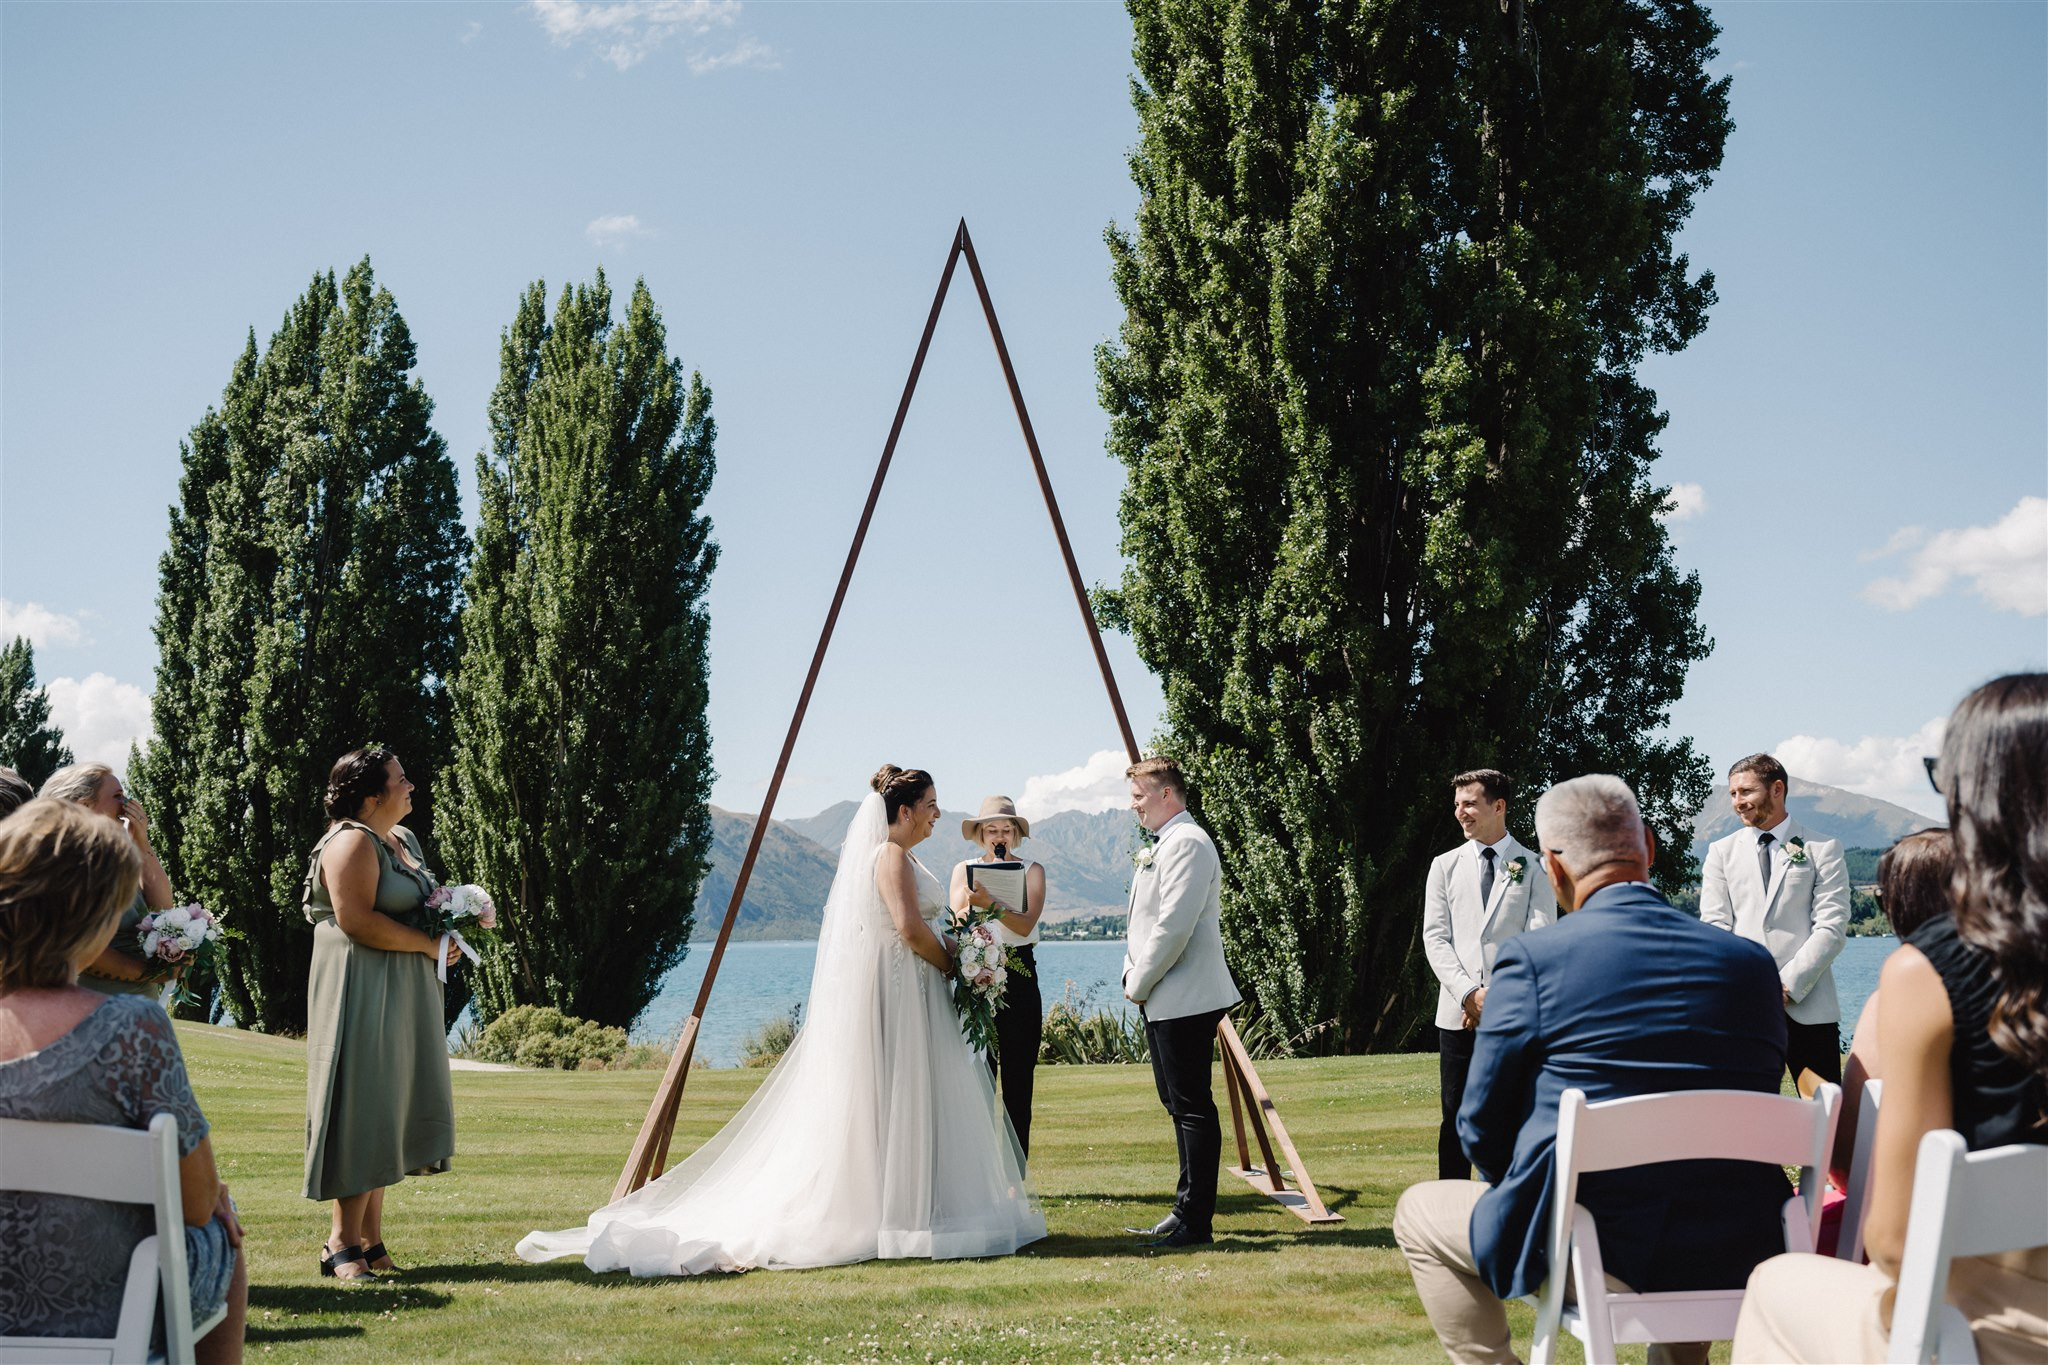 A stunning wedding on Edgewater's green lawns with Lake wanaka in the distance